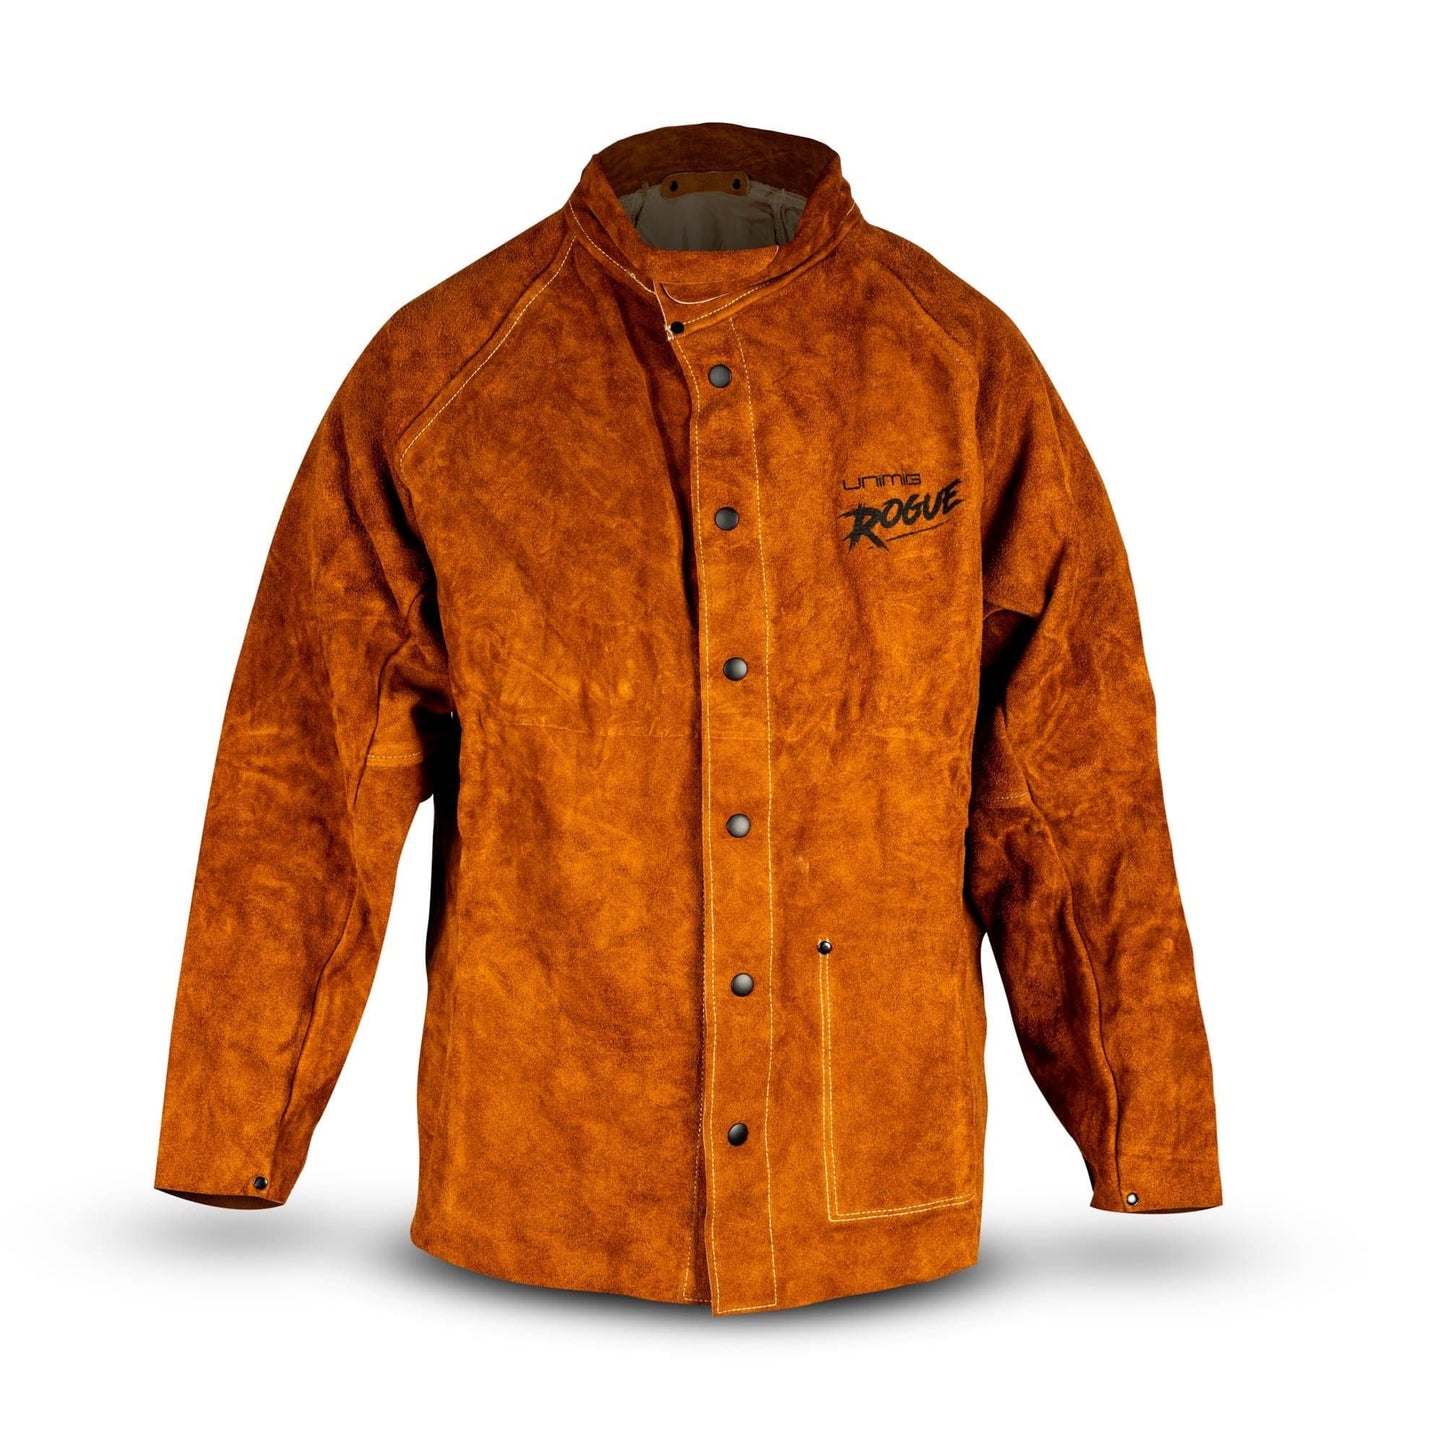 ROGUE Full Leather Welding Jacket - UMWJ-F-L - A&S Welding & Electrical